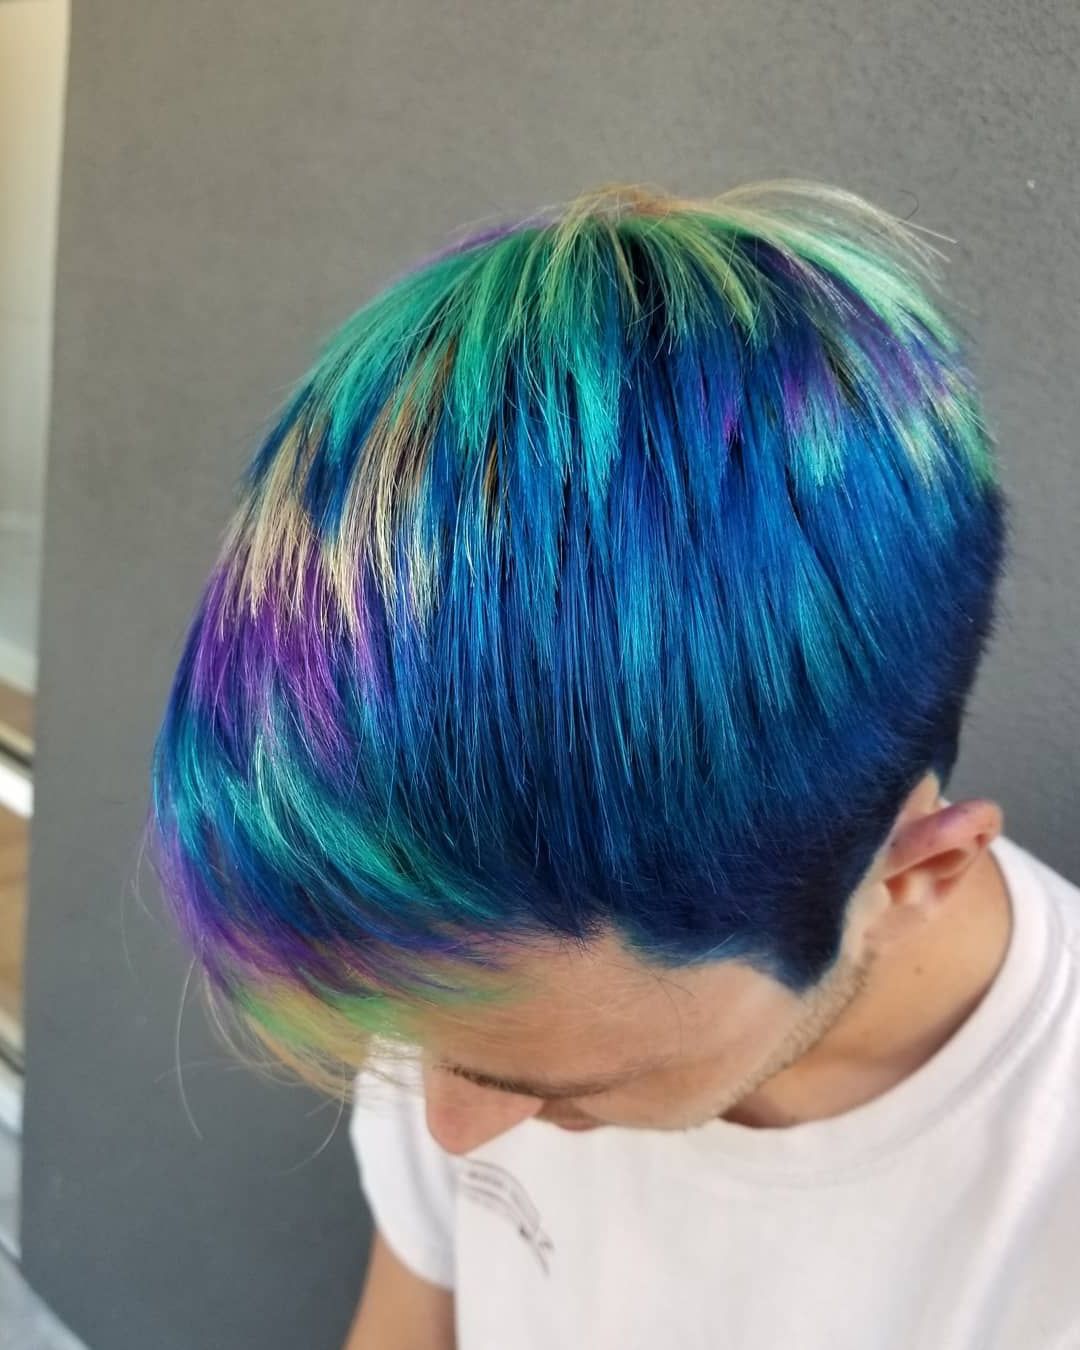 2020 Turquoise Side Parted Mohawk Hairstyles Regarding Men's Hair, Haircuts, Fade Haircuts, Short, Medium, Long (View 6 of 20)